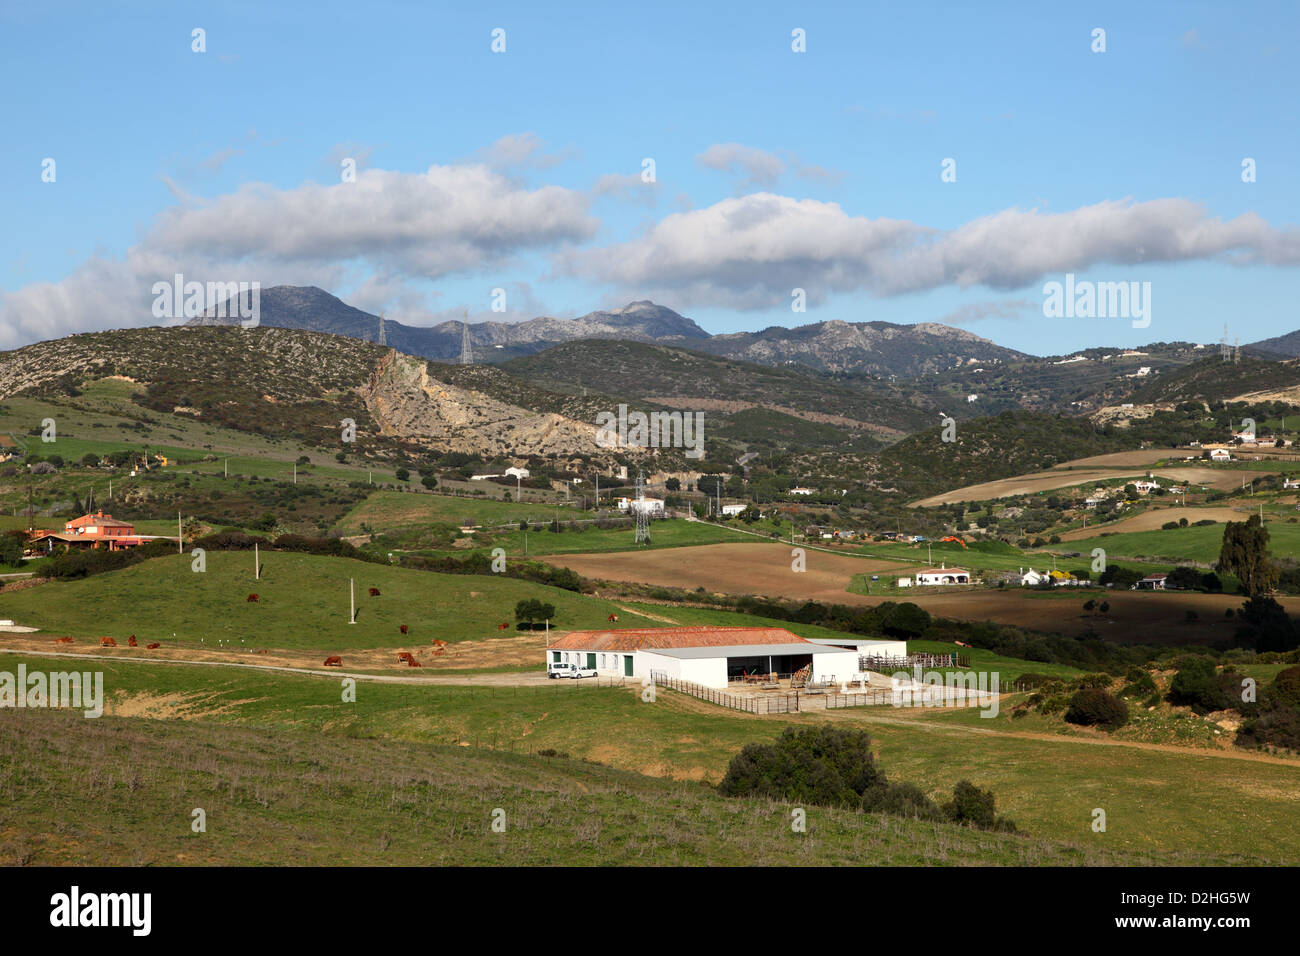 Rural landscape in Andalusia Spain Stock Photo